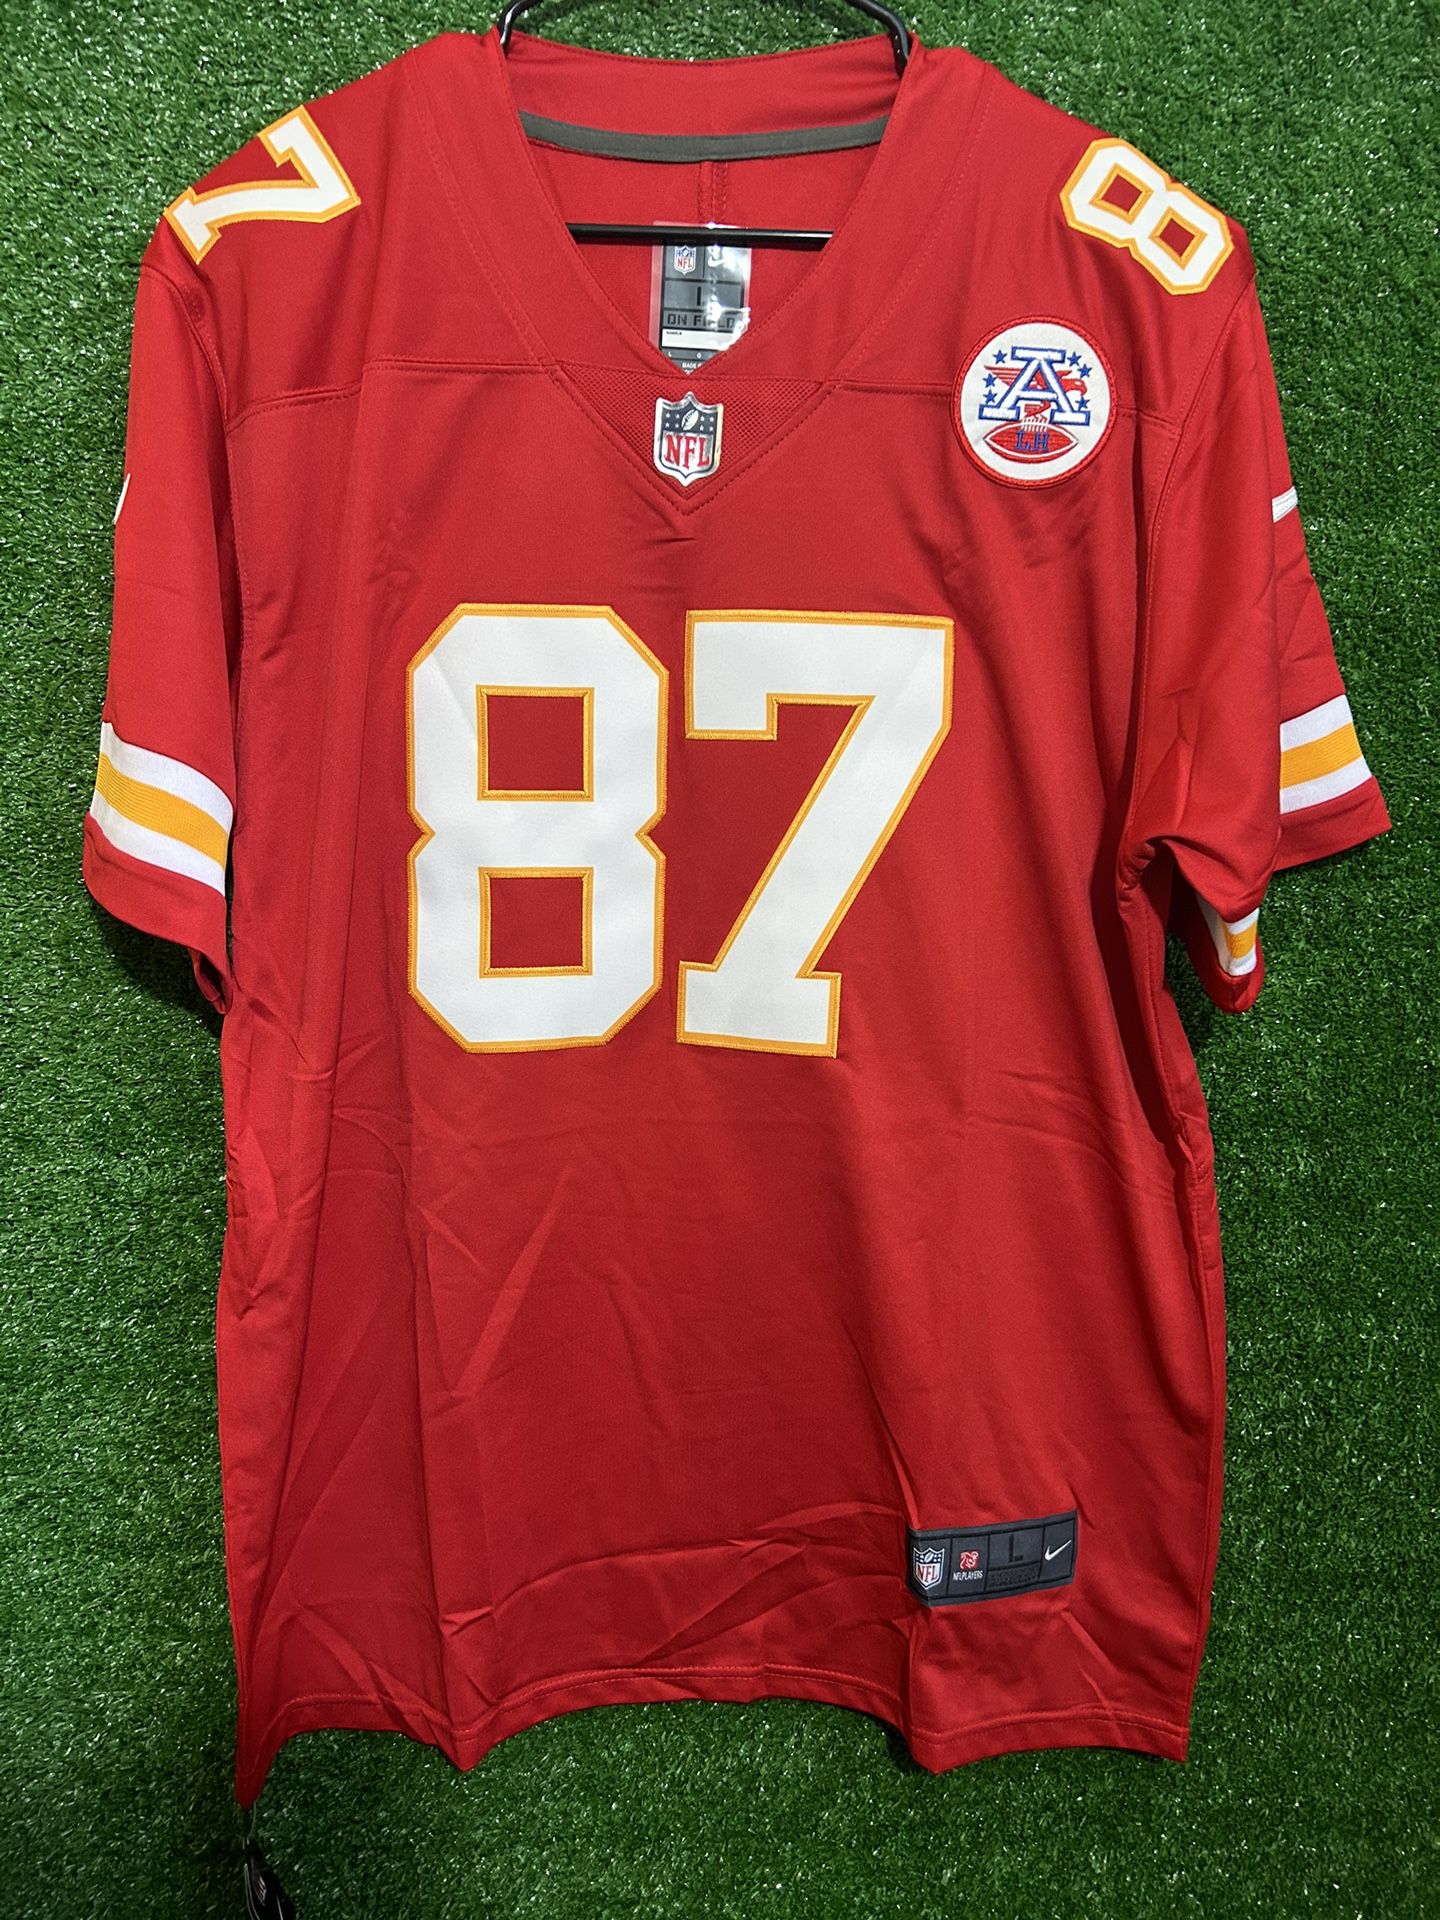 TRAVIS KELCE KANSAS CITY CHEIFS NIKE JERSEY BRAND NEW WITH TAGS SIZES LARGE AND XL AVAILABLE 